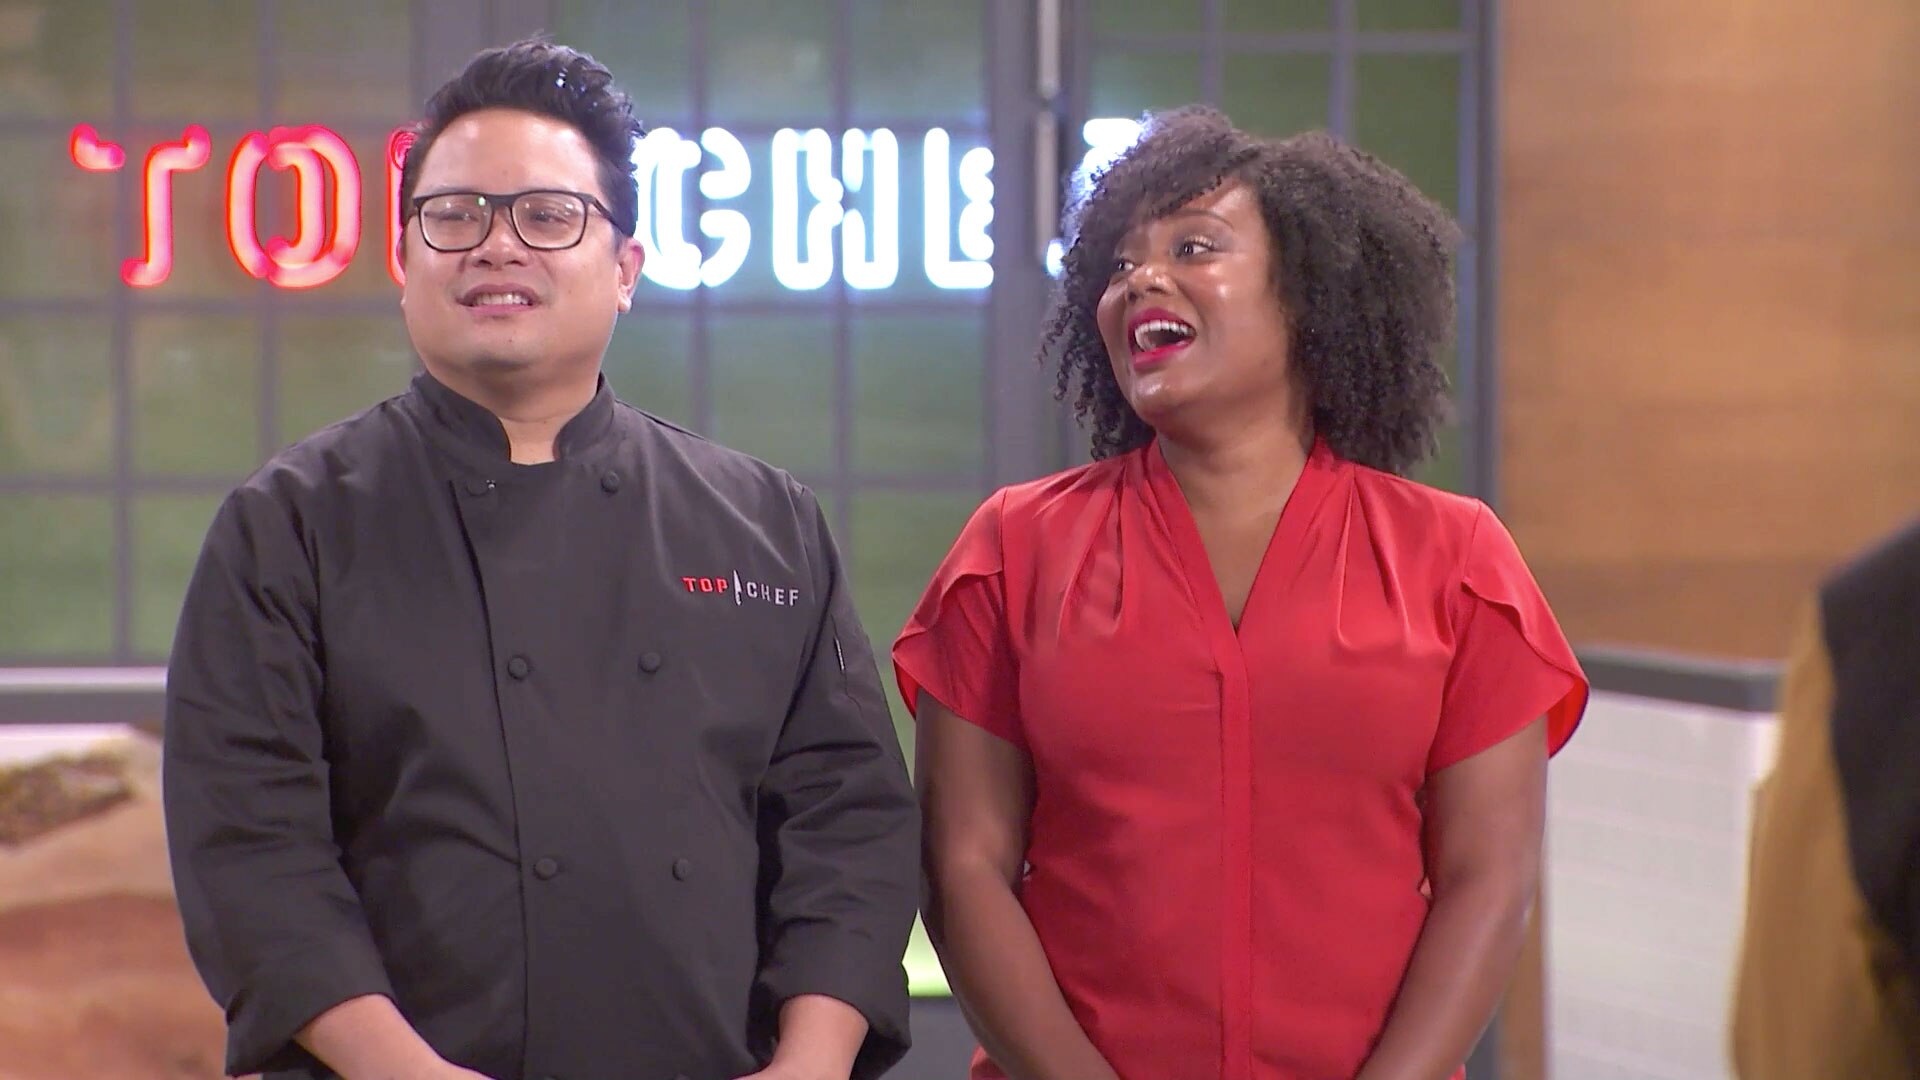 Will These Top Chef Amateurs Sink or Swim in This Fish Fillet Challenge?